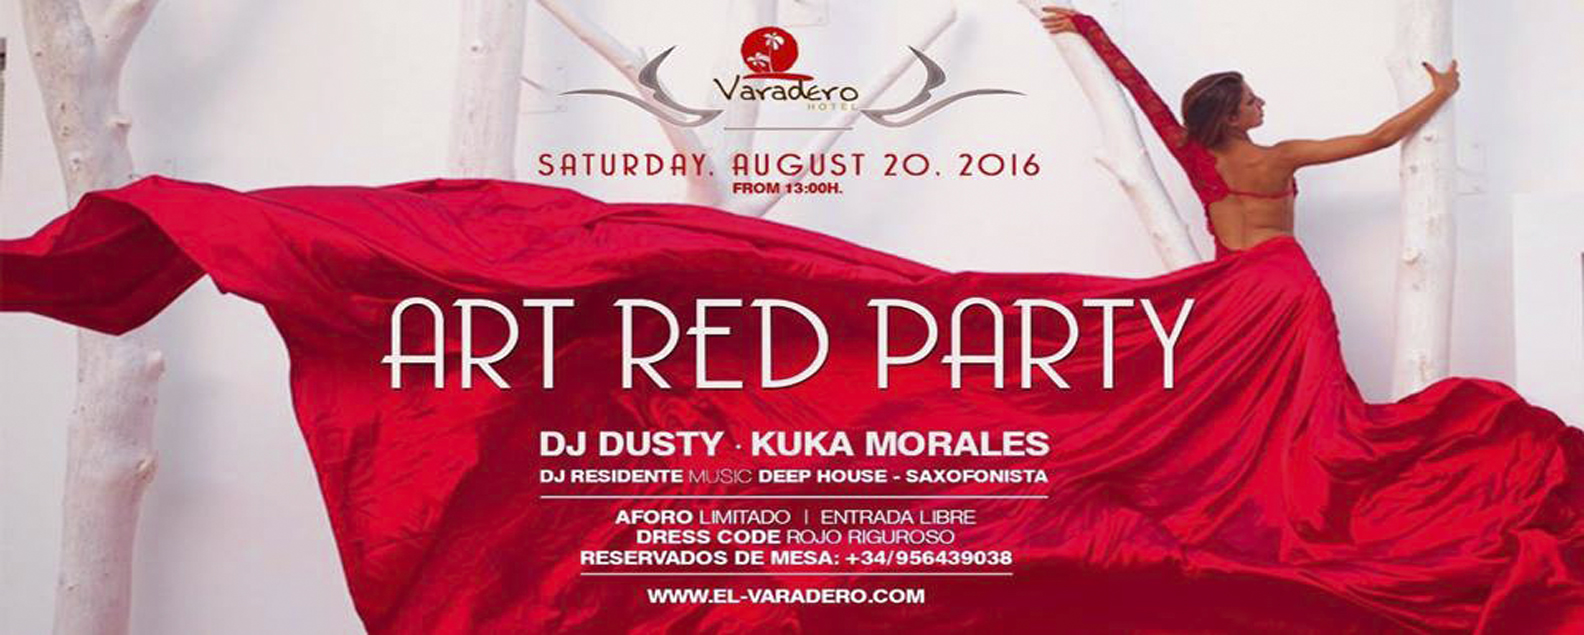 ART RED PARTY